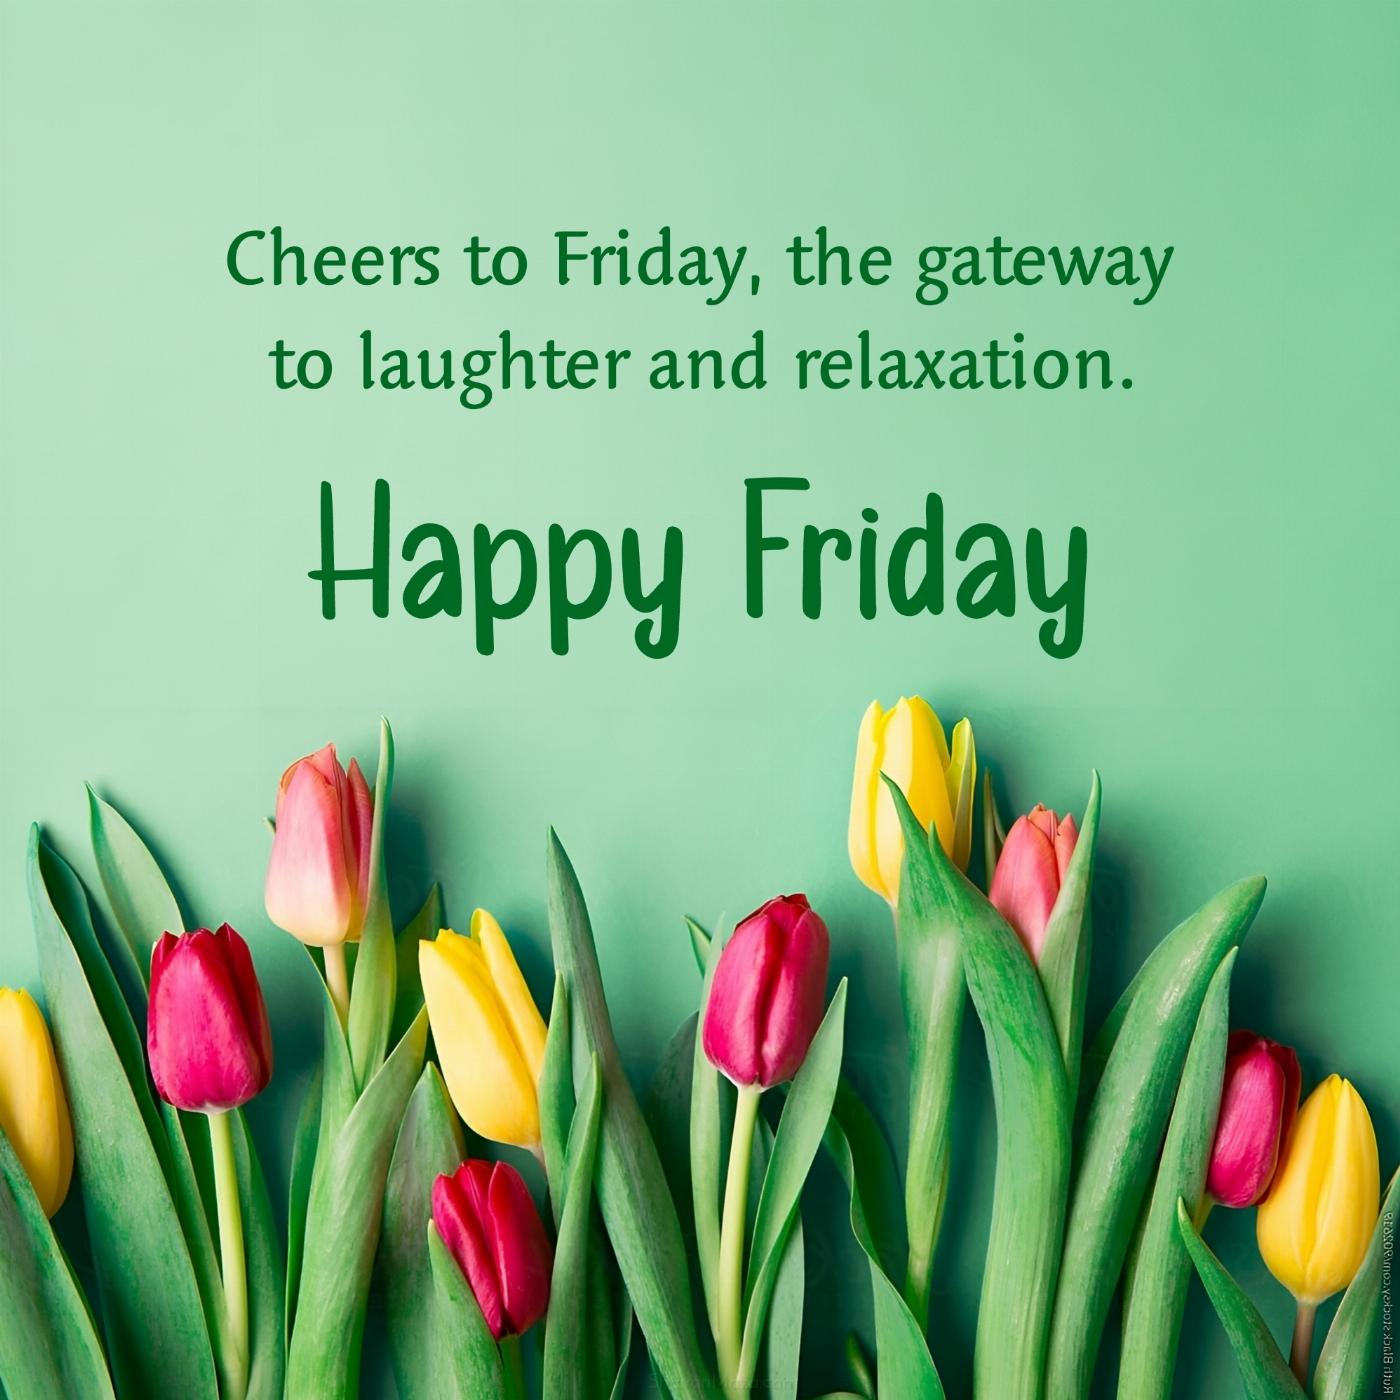 Cheers to Friday the gateway to laughter and relaxation